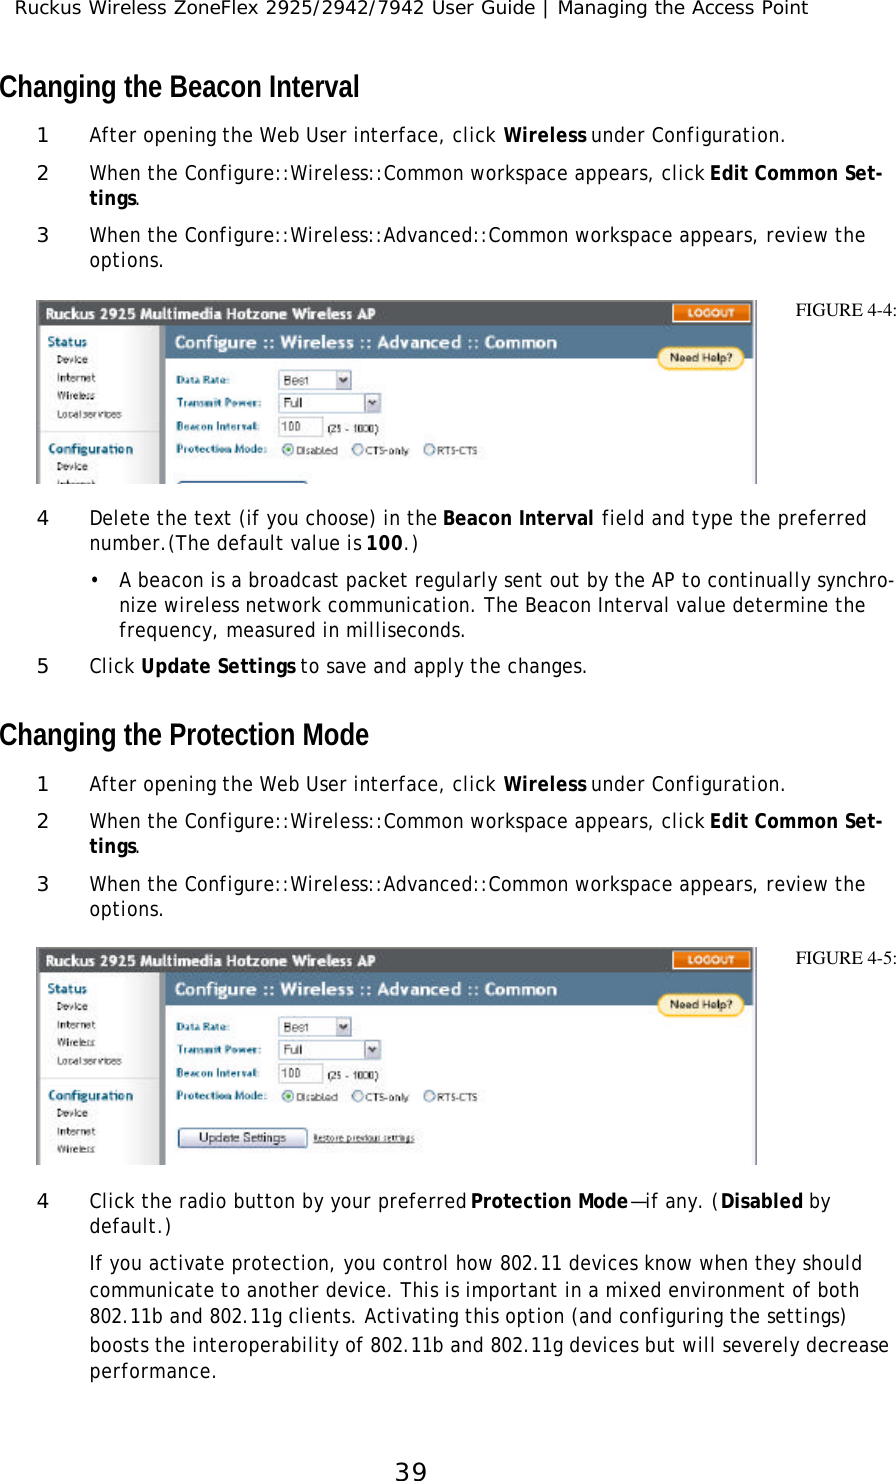 Ruckus Wireless ZoneFlex 2925/2942/7942 User Guide | Managing the Access Point39Changing the Beacon Interval1After opening the Web User interface, click Wireless under Configuration.2When the Configure::Wireless::Common workspace appears, click Edit Common Set-tings.3When the Configure::Wireless::Advanced::Common workspace appears, review the options. 4Delete the text (if you choose) in the Beacon Interval field and type the preferred number.(The default value is 100.)•A beacon is a broadcast packet regularly sent out by the AP to continually synchro-nize wireless network communication. The Beacon Interval value determine the frequency, measured in milliseconds.5Click Update Settings to save and apply the changes.Changing the Protection Mode1After opening the Web User interface, click Wireless under Configuration.2When the Configure::Wireless::Common workspace appears, click Edit Common Set-tings.3When the Configure::Wireless::Advanced::Common workspace appears, review the options. 4Click the radio button by your preferred Protection Mode—if any. (Disabled by default.) If you activate protection, you control how 802.11 devices know when they should communicate to another device. This is important in a mixed environment of both 802.11b and 802.11g clients. Activating this option (and configuring the settings) boosts the interoperability of 802.11b and 802.11g devices but will severely decrease performance.FIGURE 4-4:FIGURE 4-5: